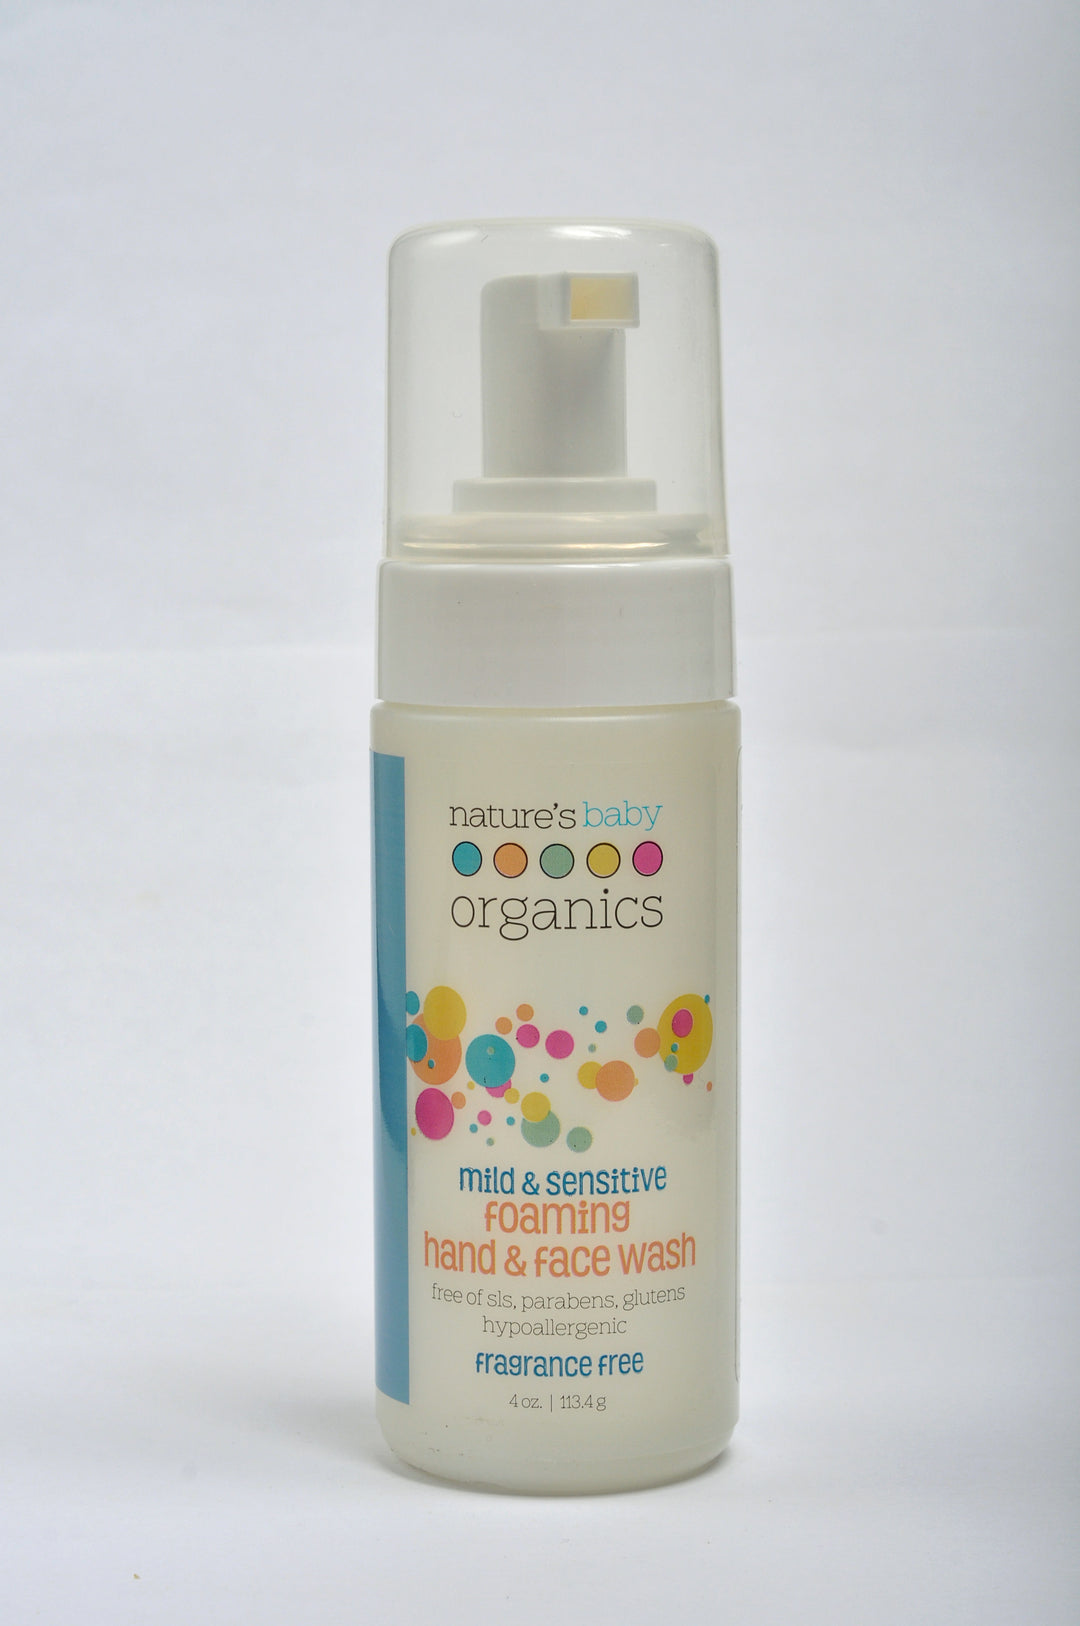 Nature’s Baby Organics Foaming Hand & Face wash, Formulated for Sensitive Skin, Tear Free, No SLS & pH Neutral, Fragrance Free, 4 oz